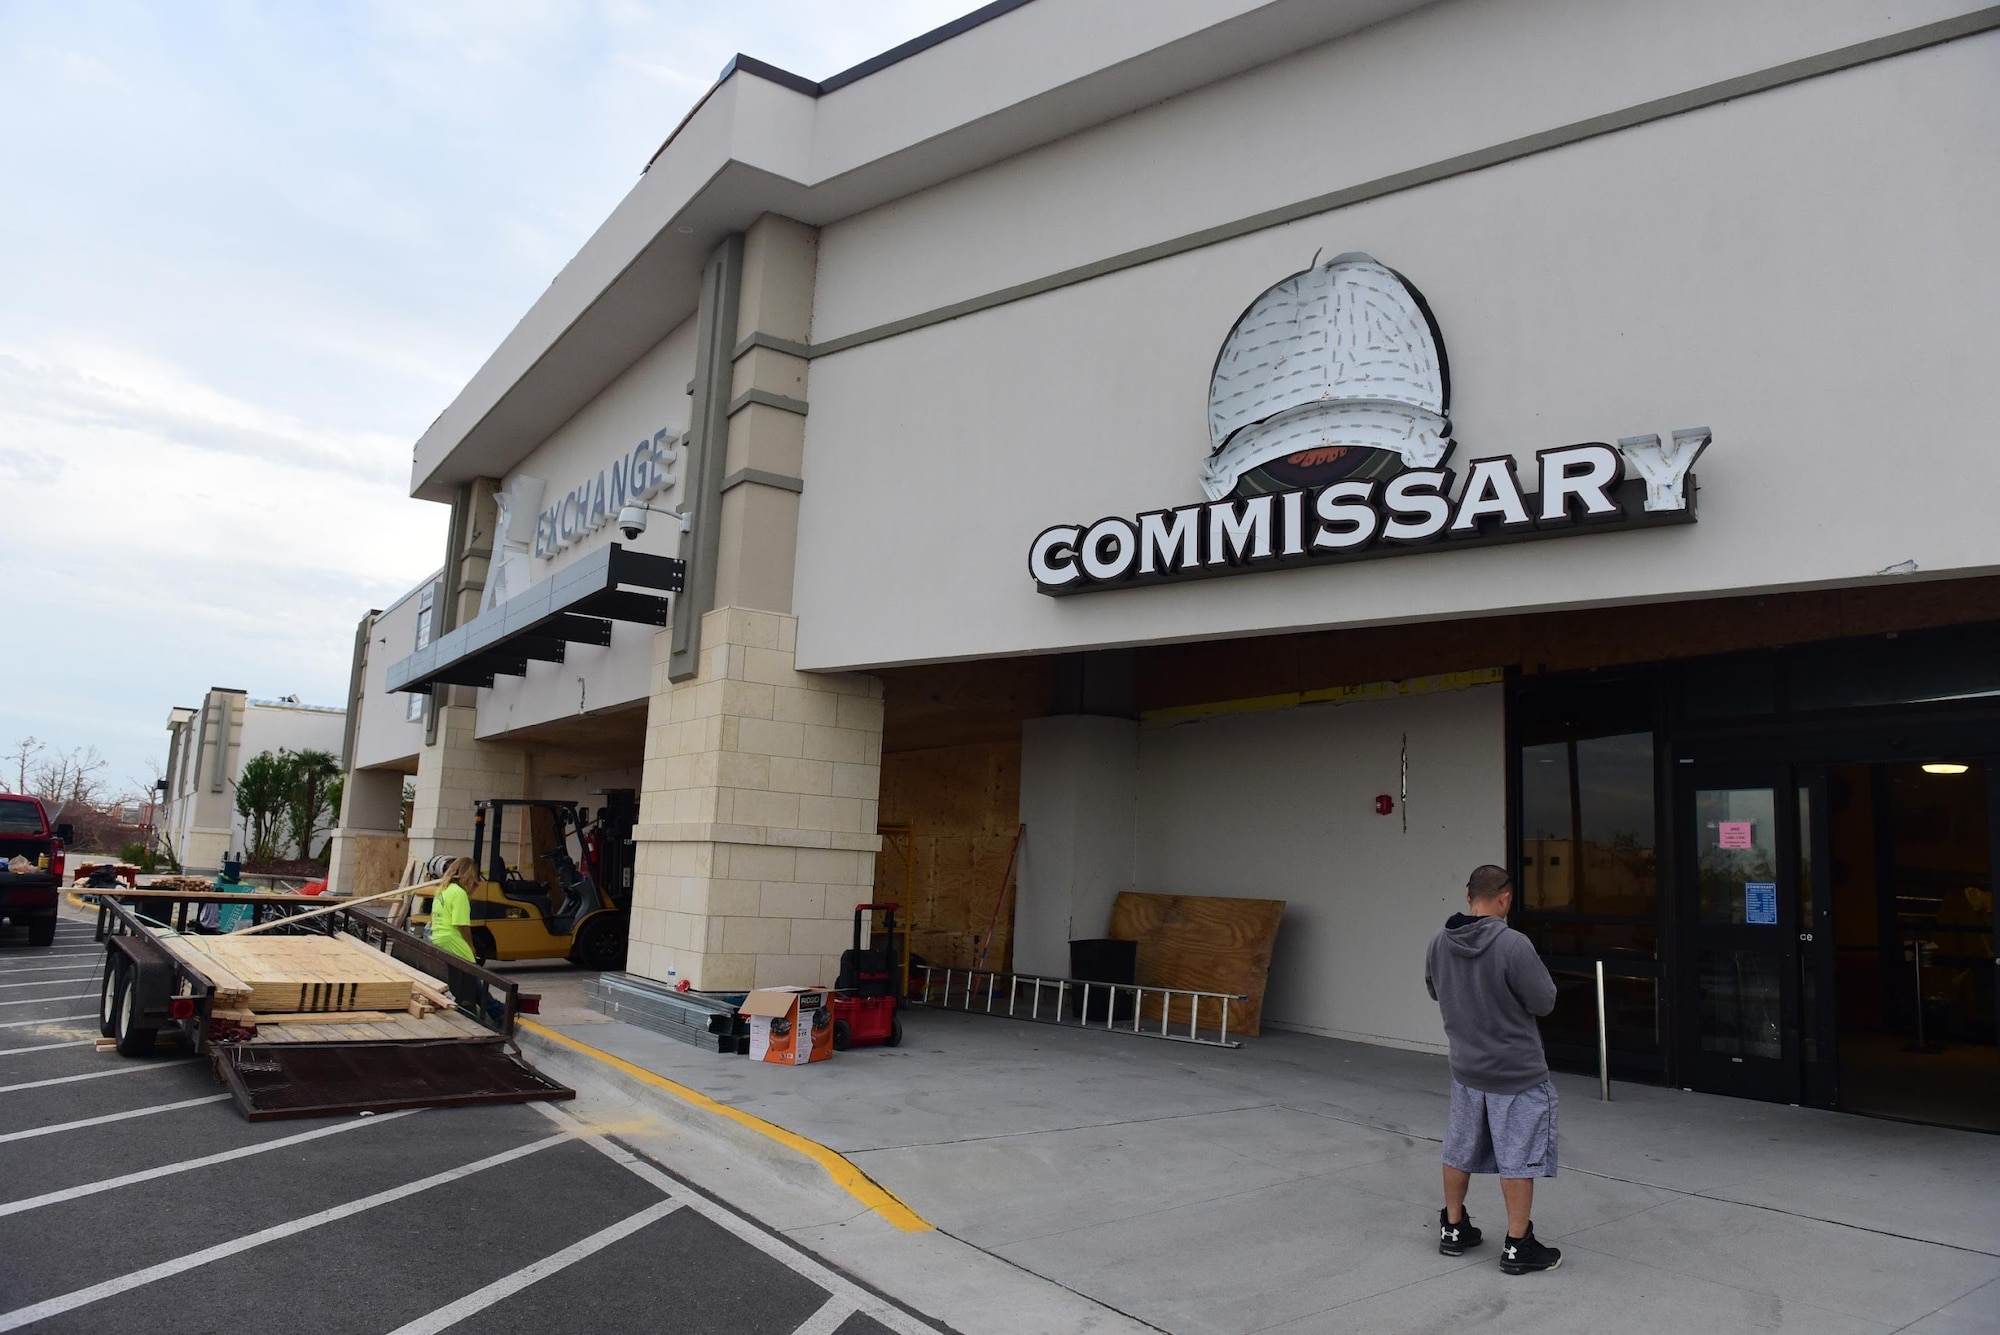 The Tyndall Commissary undergoes repairs after being hit with the effects of Hurricane Michael at Tyndall Air Force Base, Fla., Nov. 19, 2018. Though still under minor repair work, the commissary is open and selling goods to those able to get on base. Several customer-service organizations reopened Nov. 17 for DOD ID cardholders to utilize. Many services on Tyndall were temporarily shut down due to the damage from Hurricane Michael. (U.S. Air Force photo by Senior Airman Cody R. Miller)